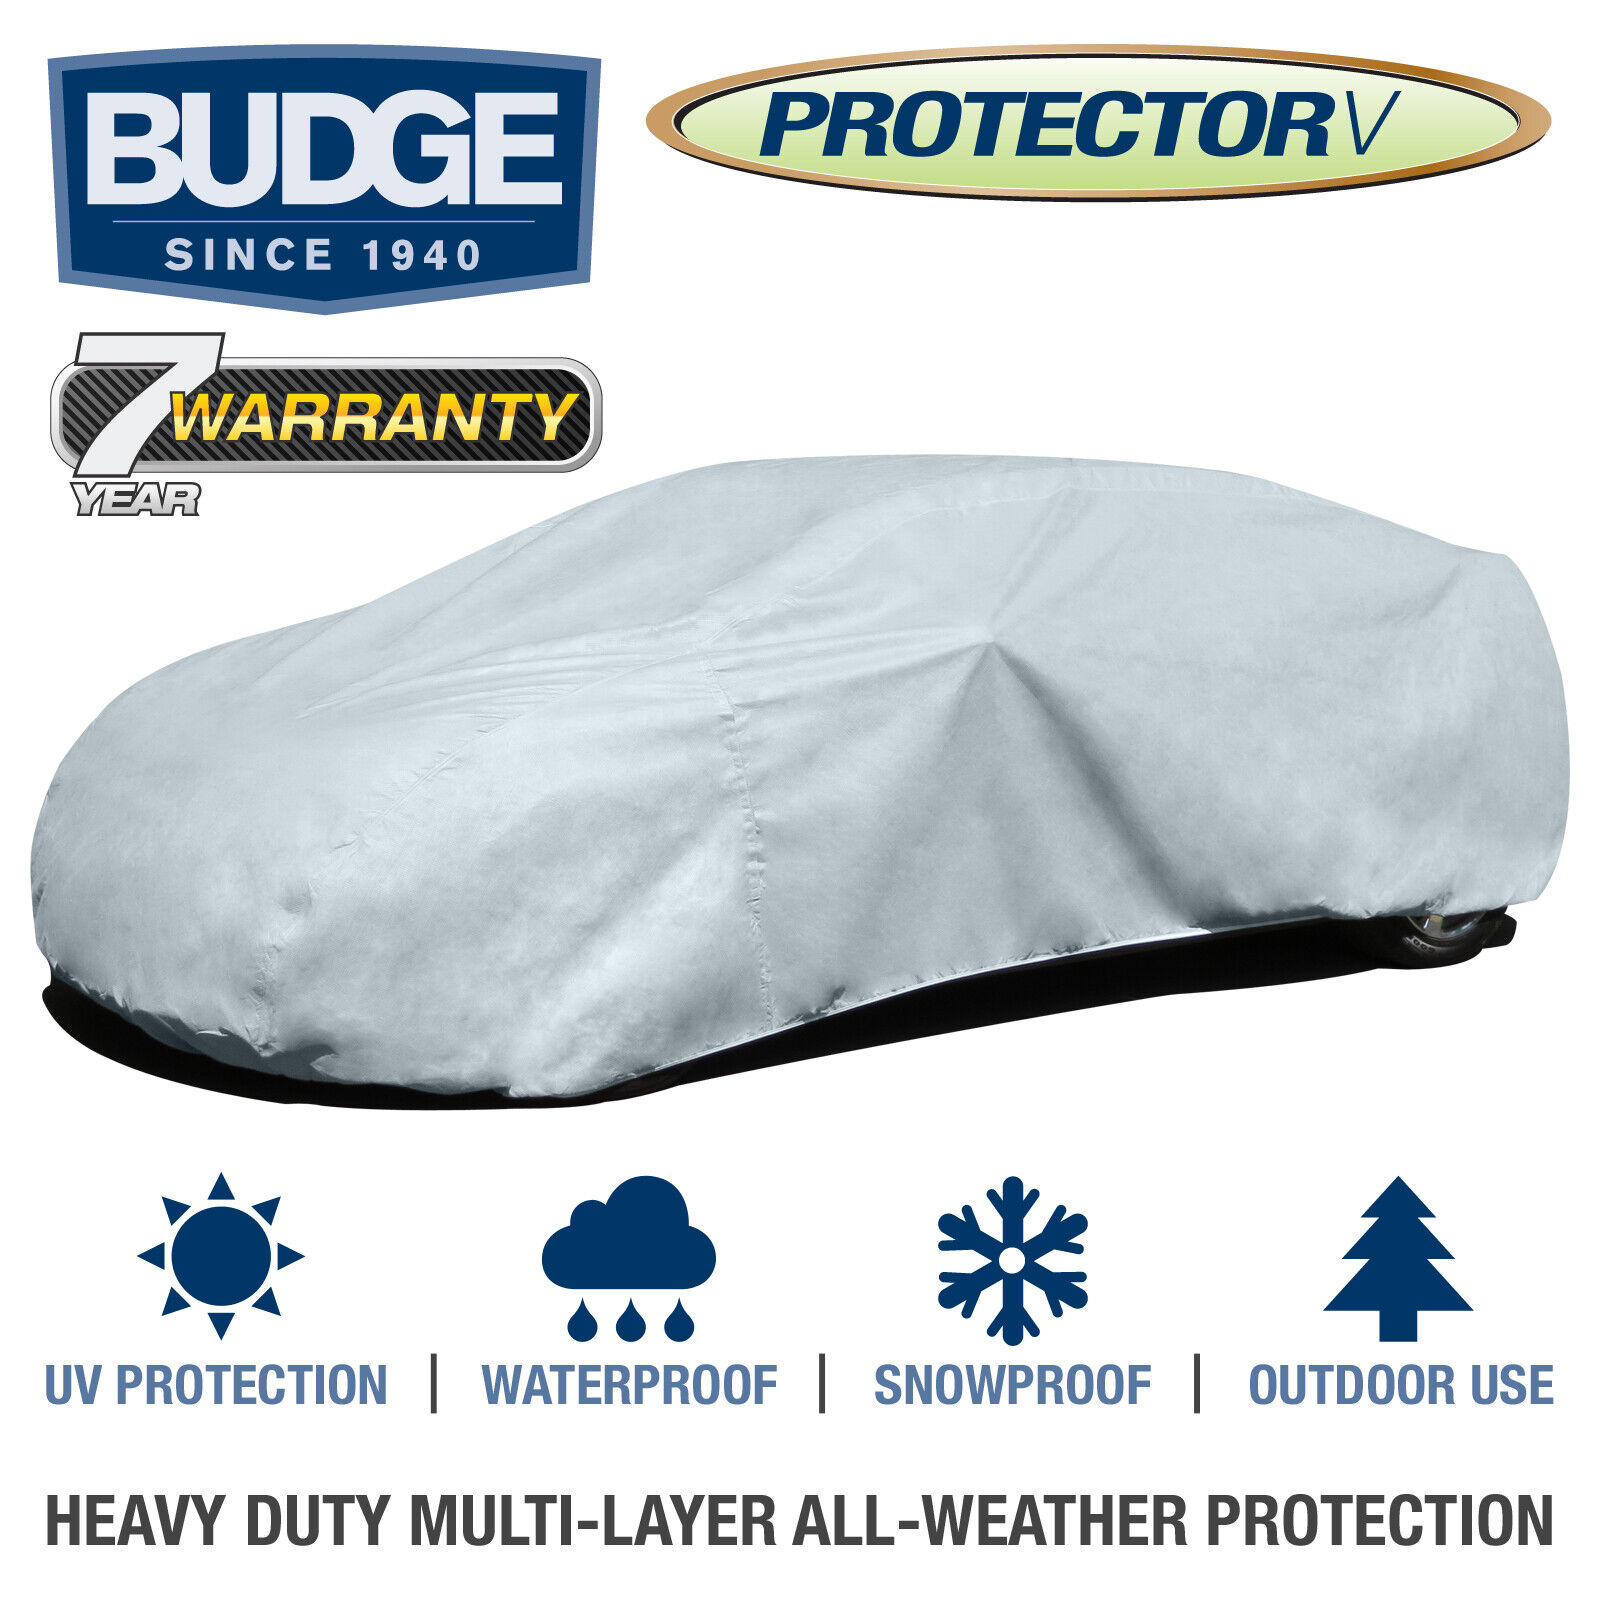 Budge Protector V Car Cover Fits Toyota Celica 1997 | Waterproof | Breathable